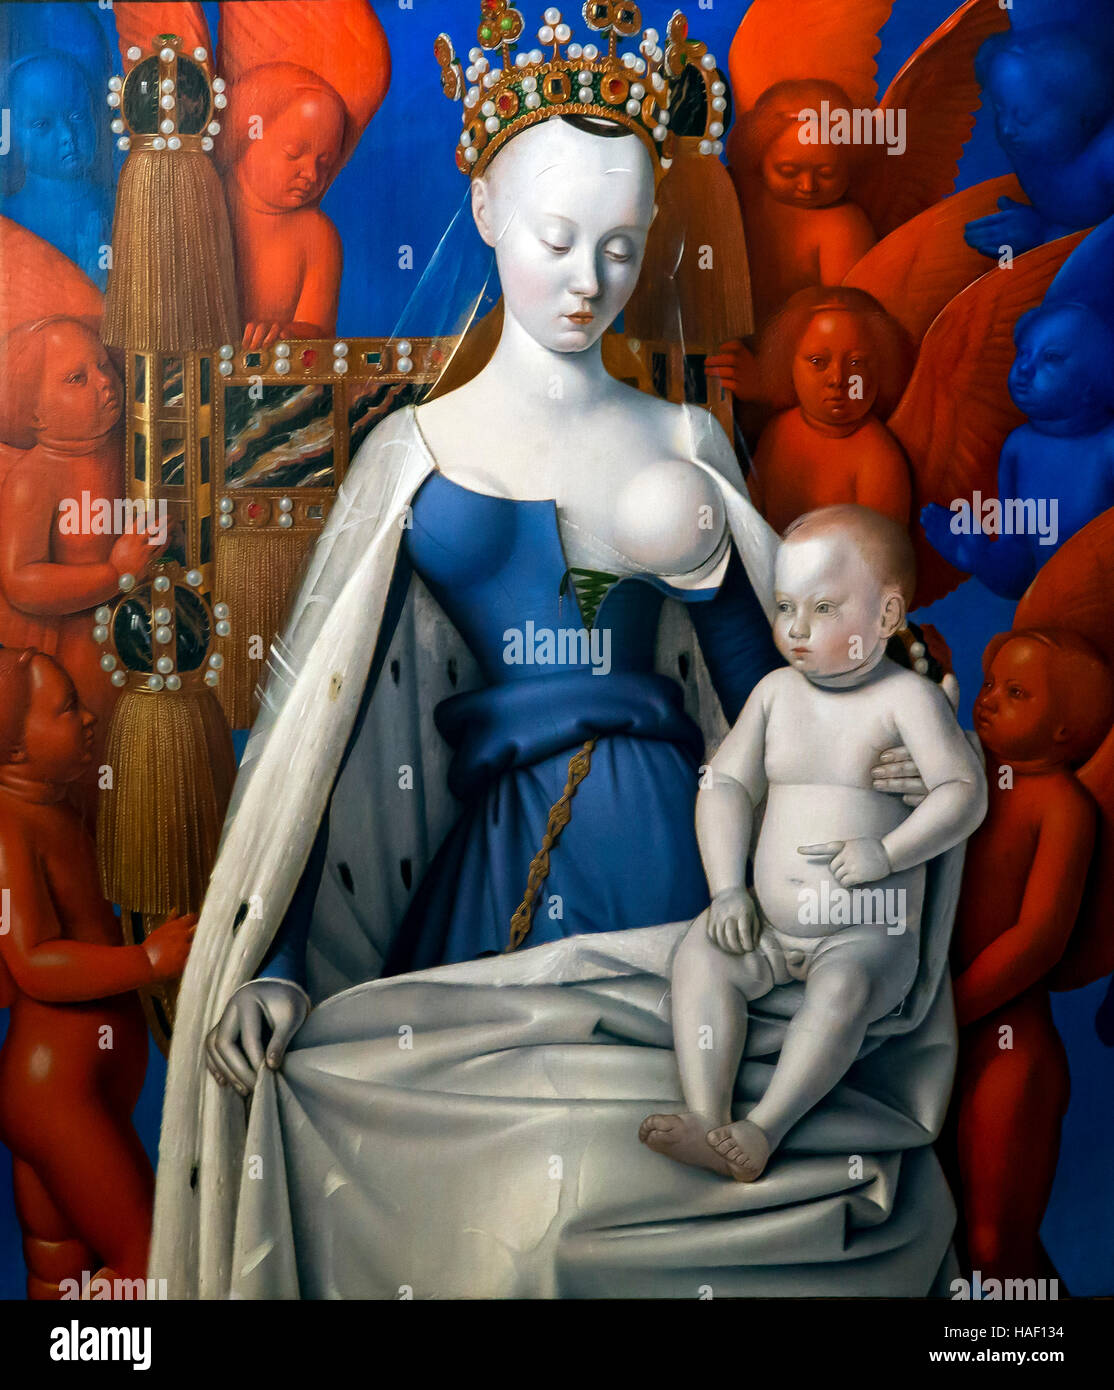 Madonna surrounded by Seraphim and Cherubim, by Jean Fouquet, 1452, Royal Museum of Fine Arts Antwerp, Belgium, Europe Stock Photo